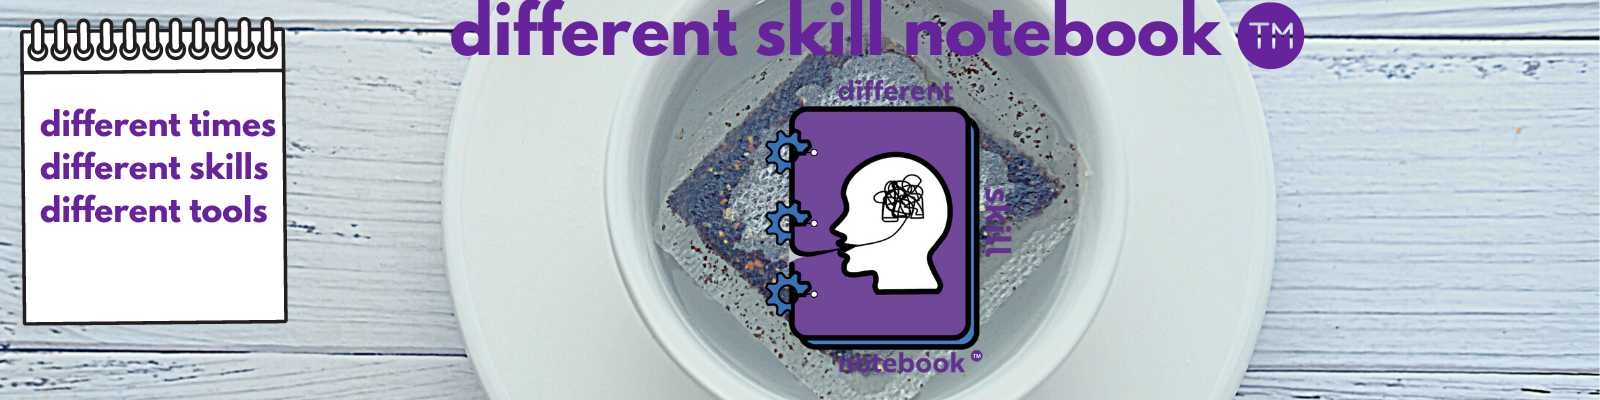 Different Skill Notebook